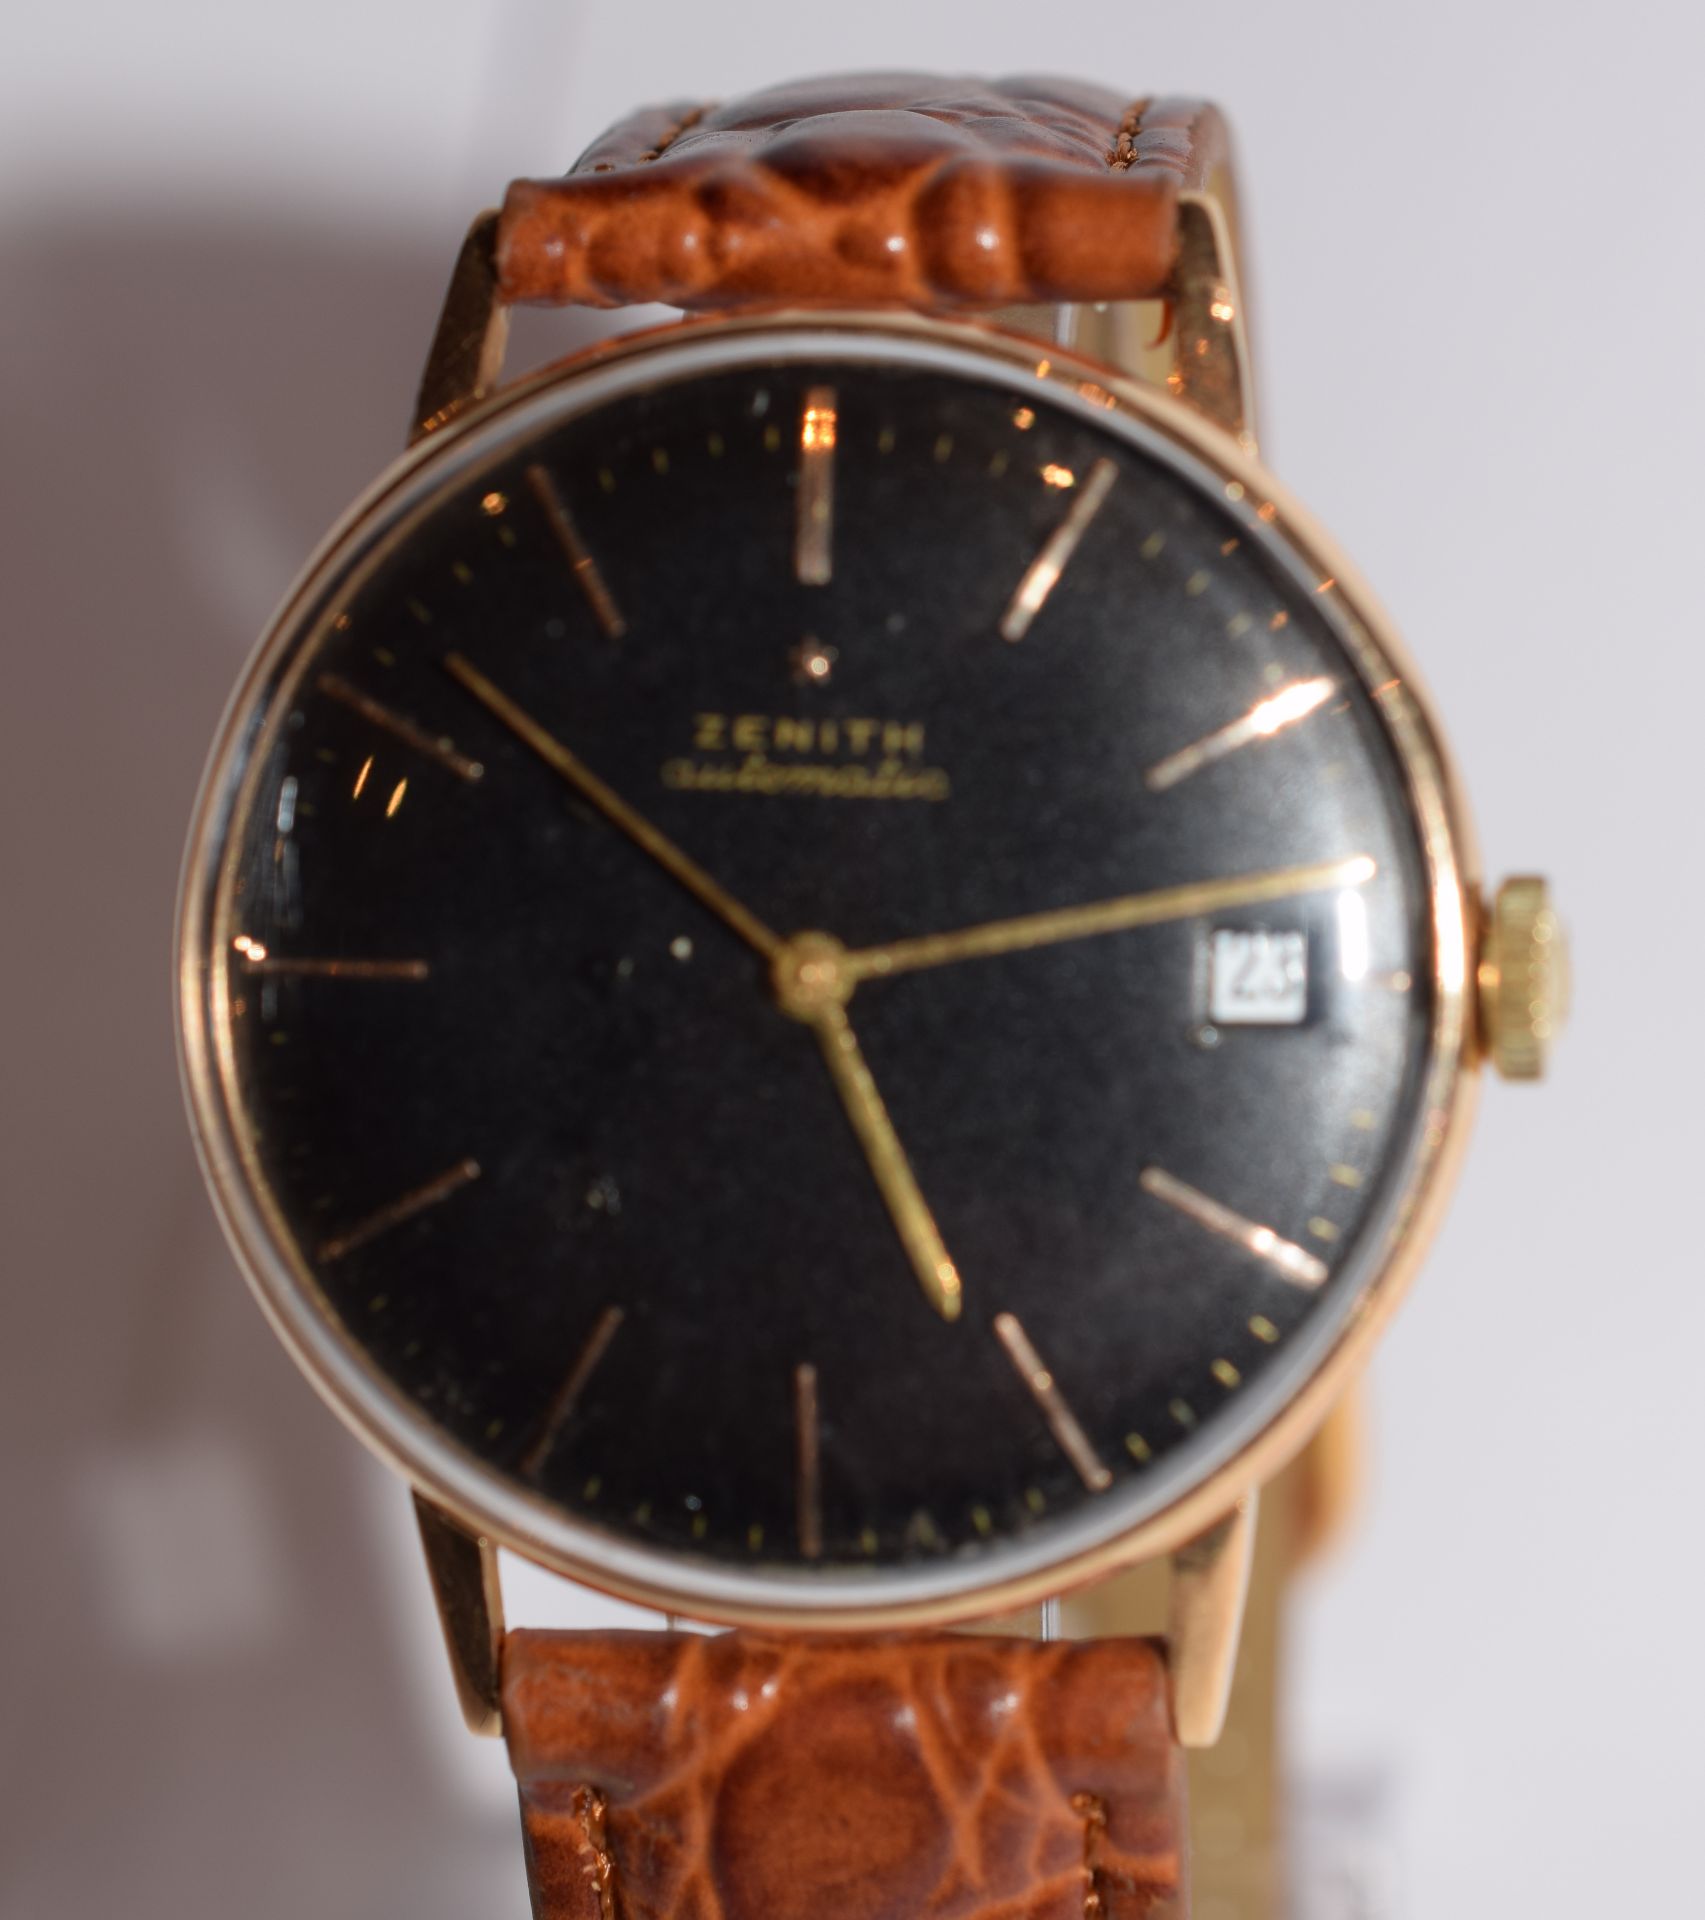 18ct Gold Zenith Wristwatch - Image 4 of 7